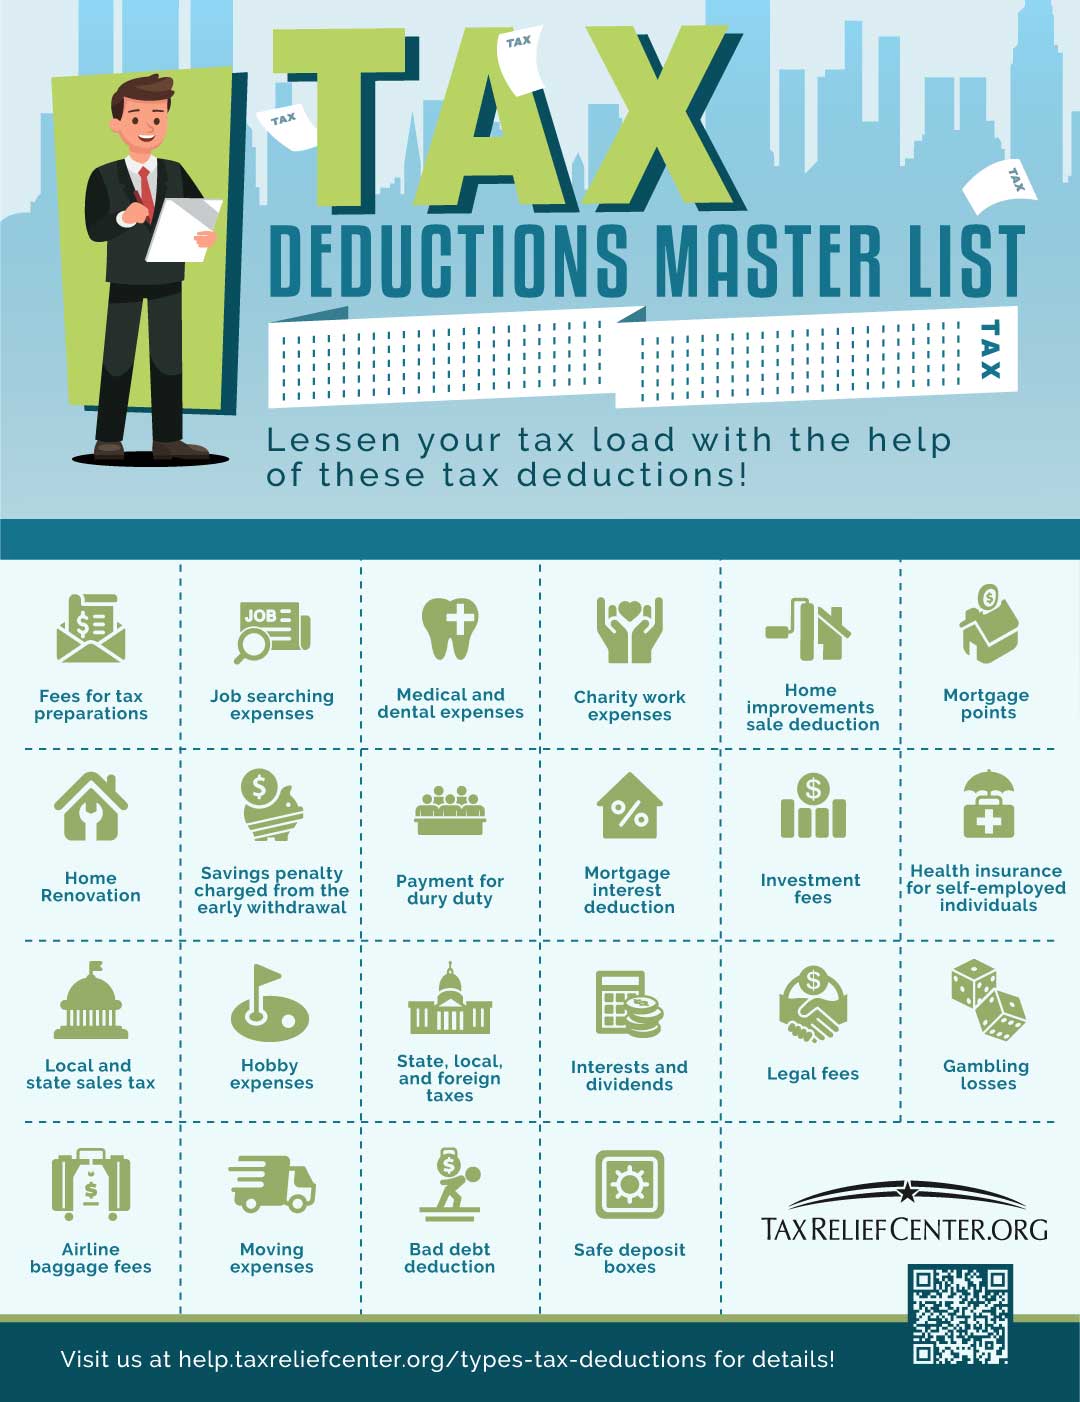 The Master List of All Types of Tax Deductions [INFOGRAPHIC]